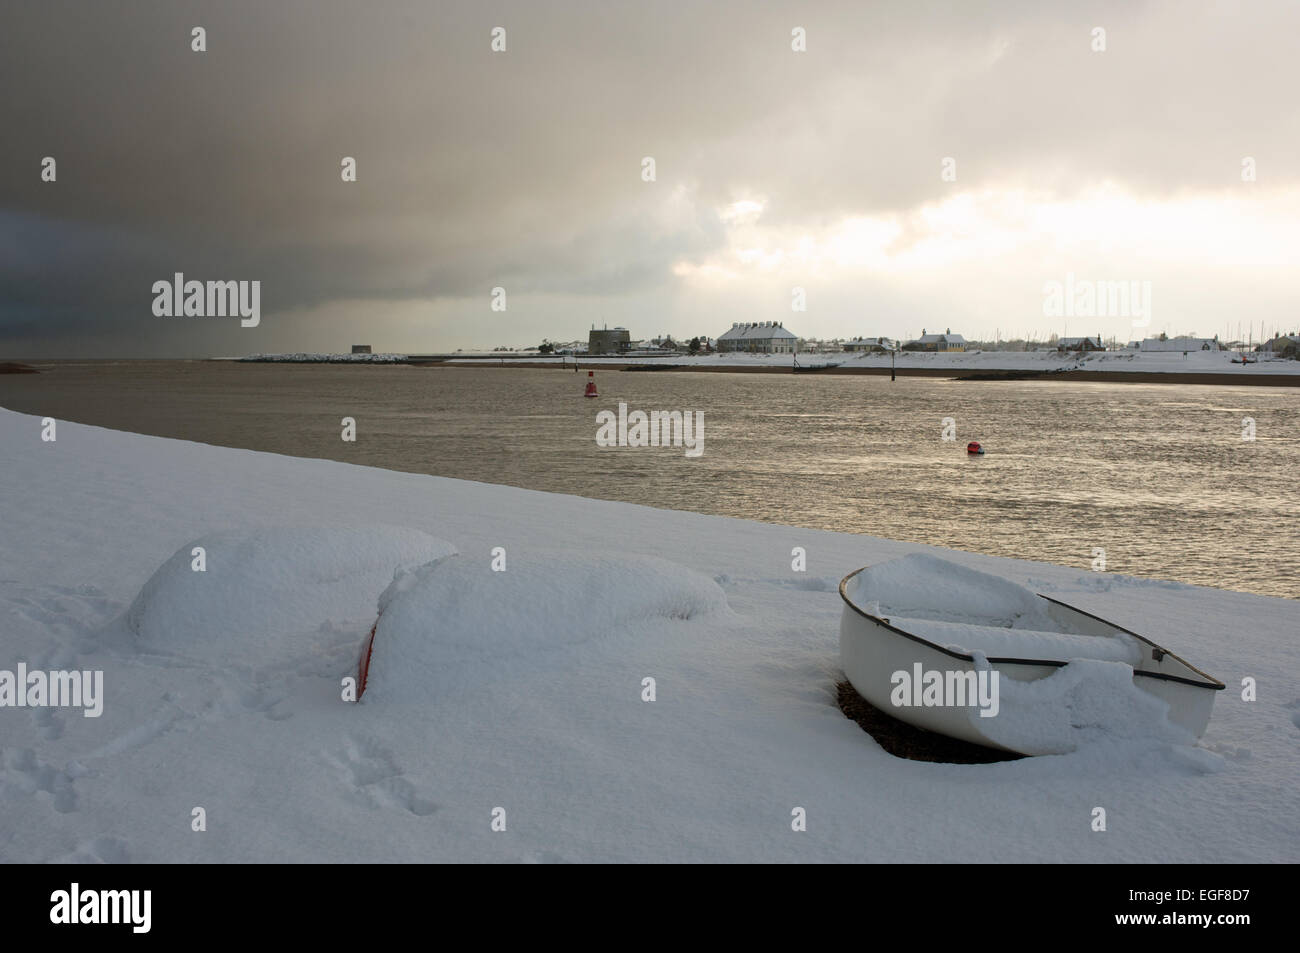 Snow covering the beach at Bawdsey Ferry, Suffolk, UK. Stock Photo